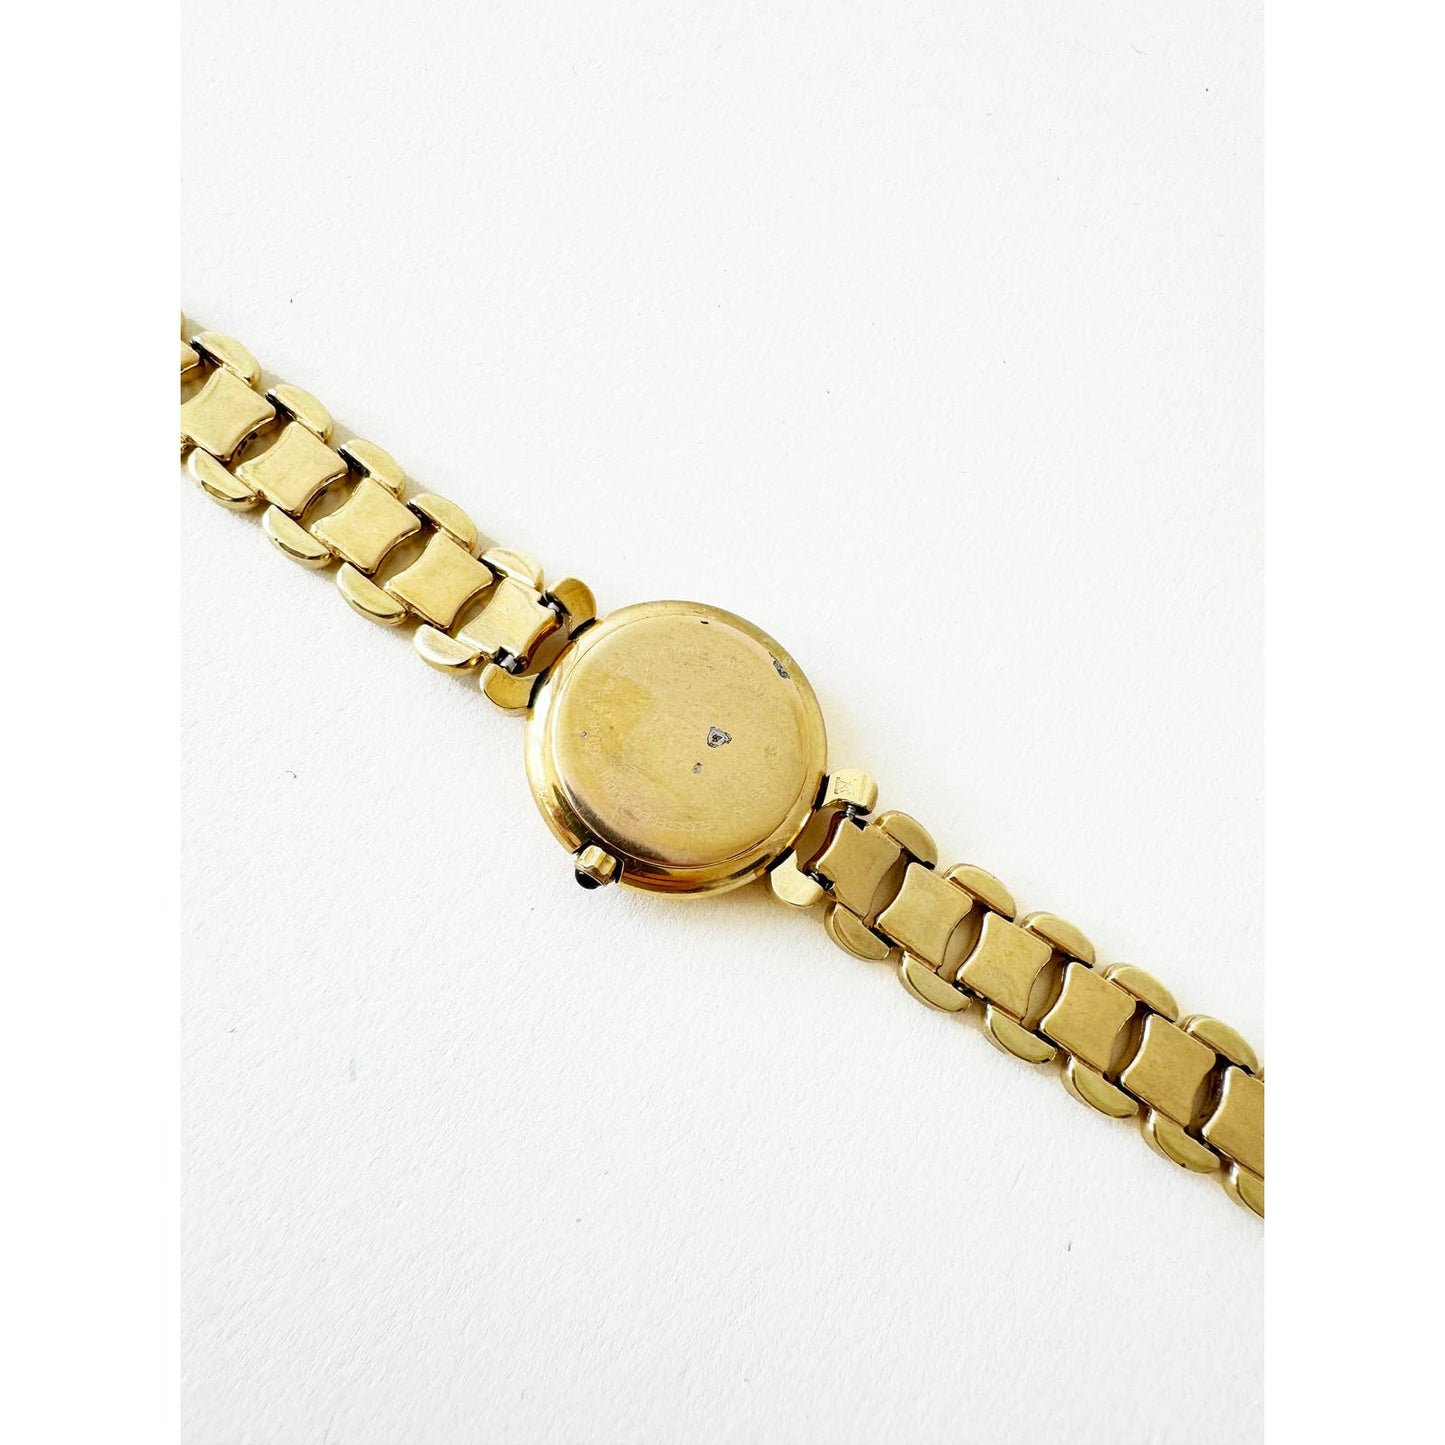 Vintage Fendi Gold Watch with Dark Mother of Pearl Face